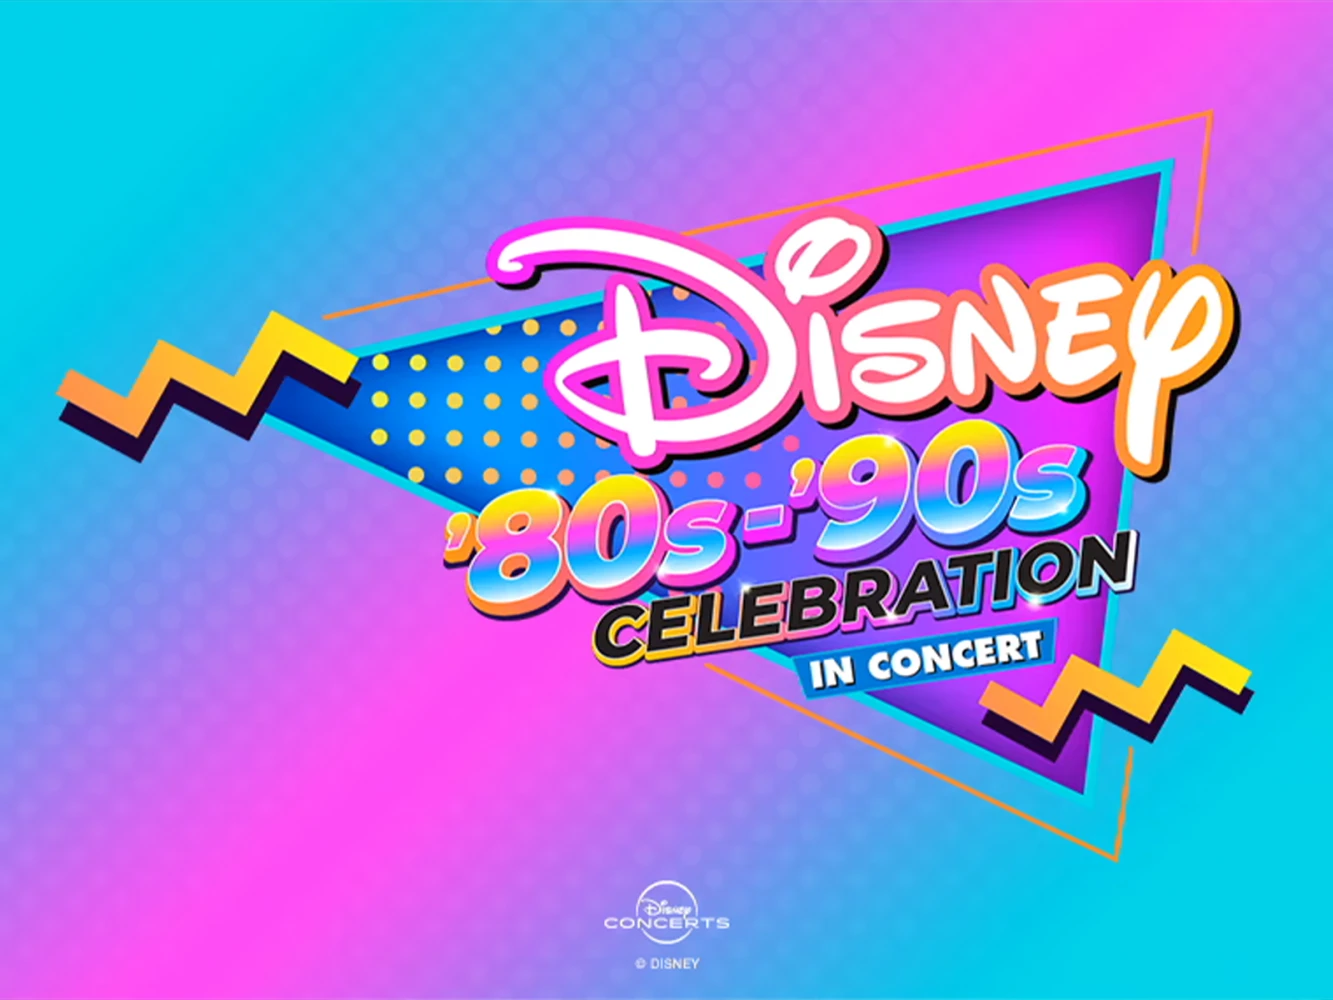 Disney ’80s-’90s Celebration in Concert: What to expect - 1